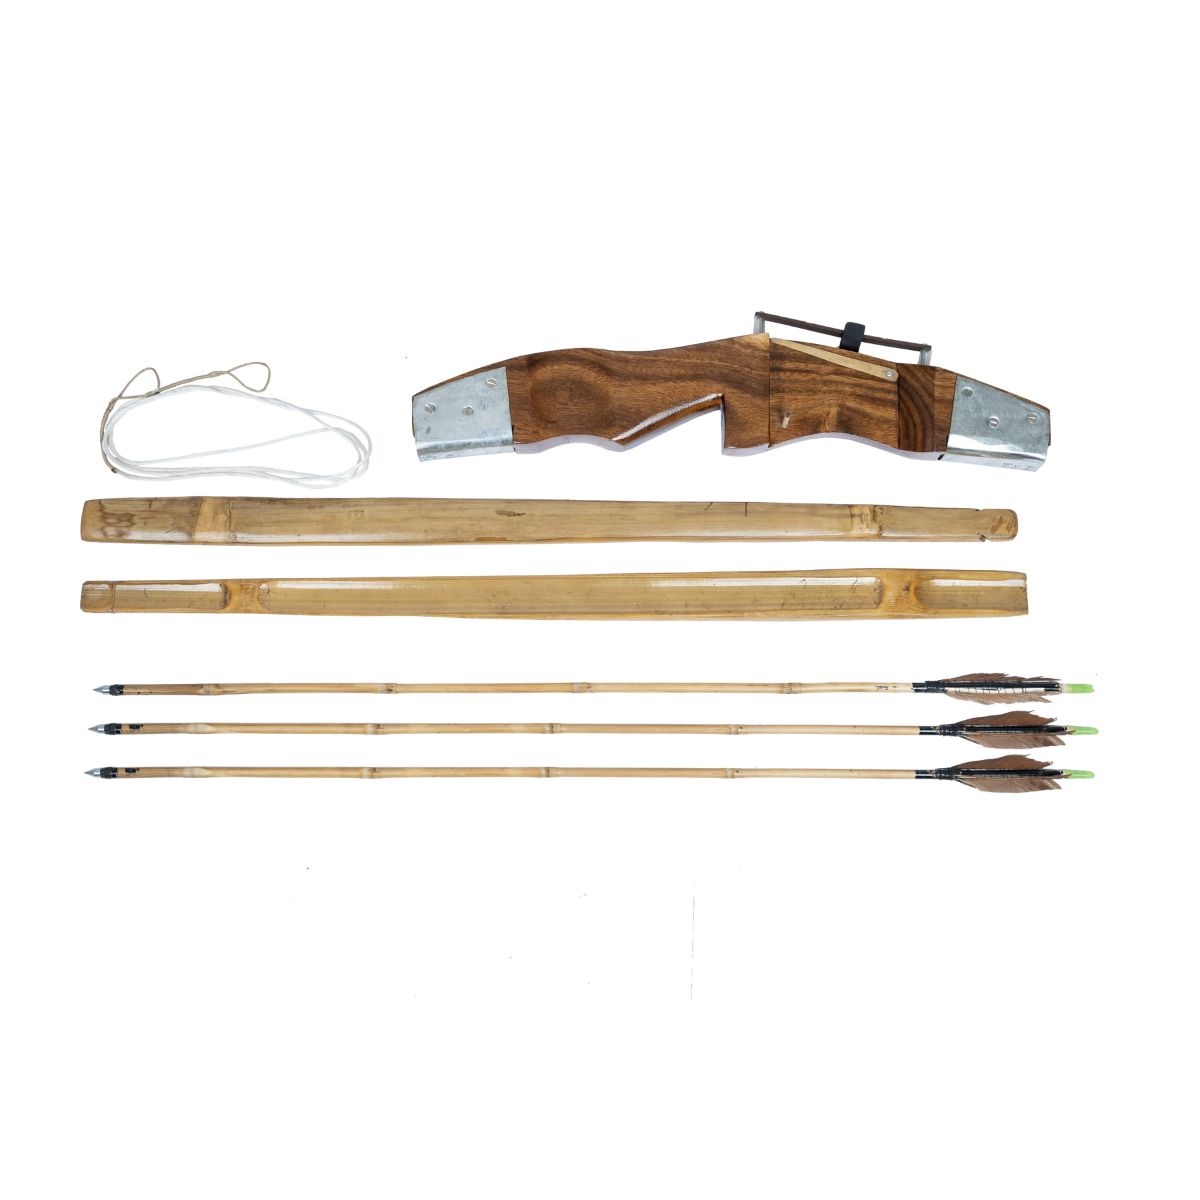 Traditional Indian Long Bow Set - A56TLB 5